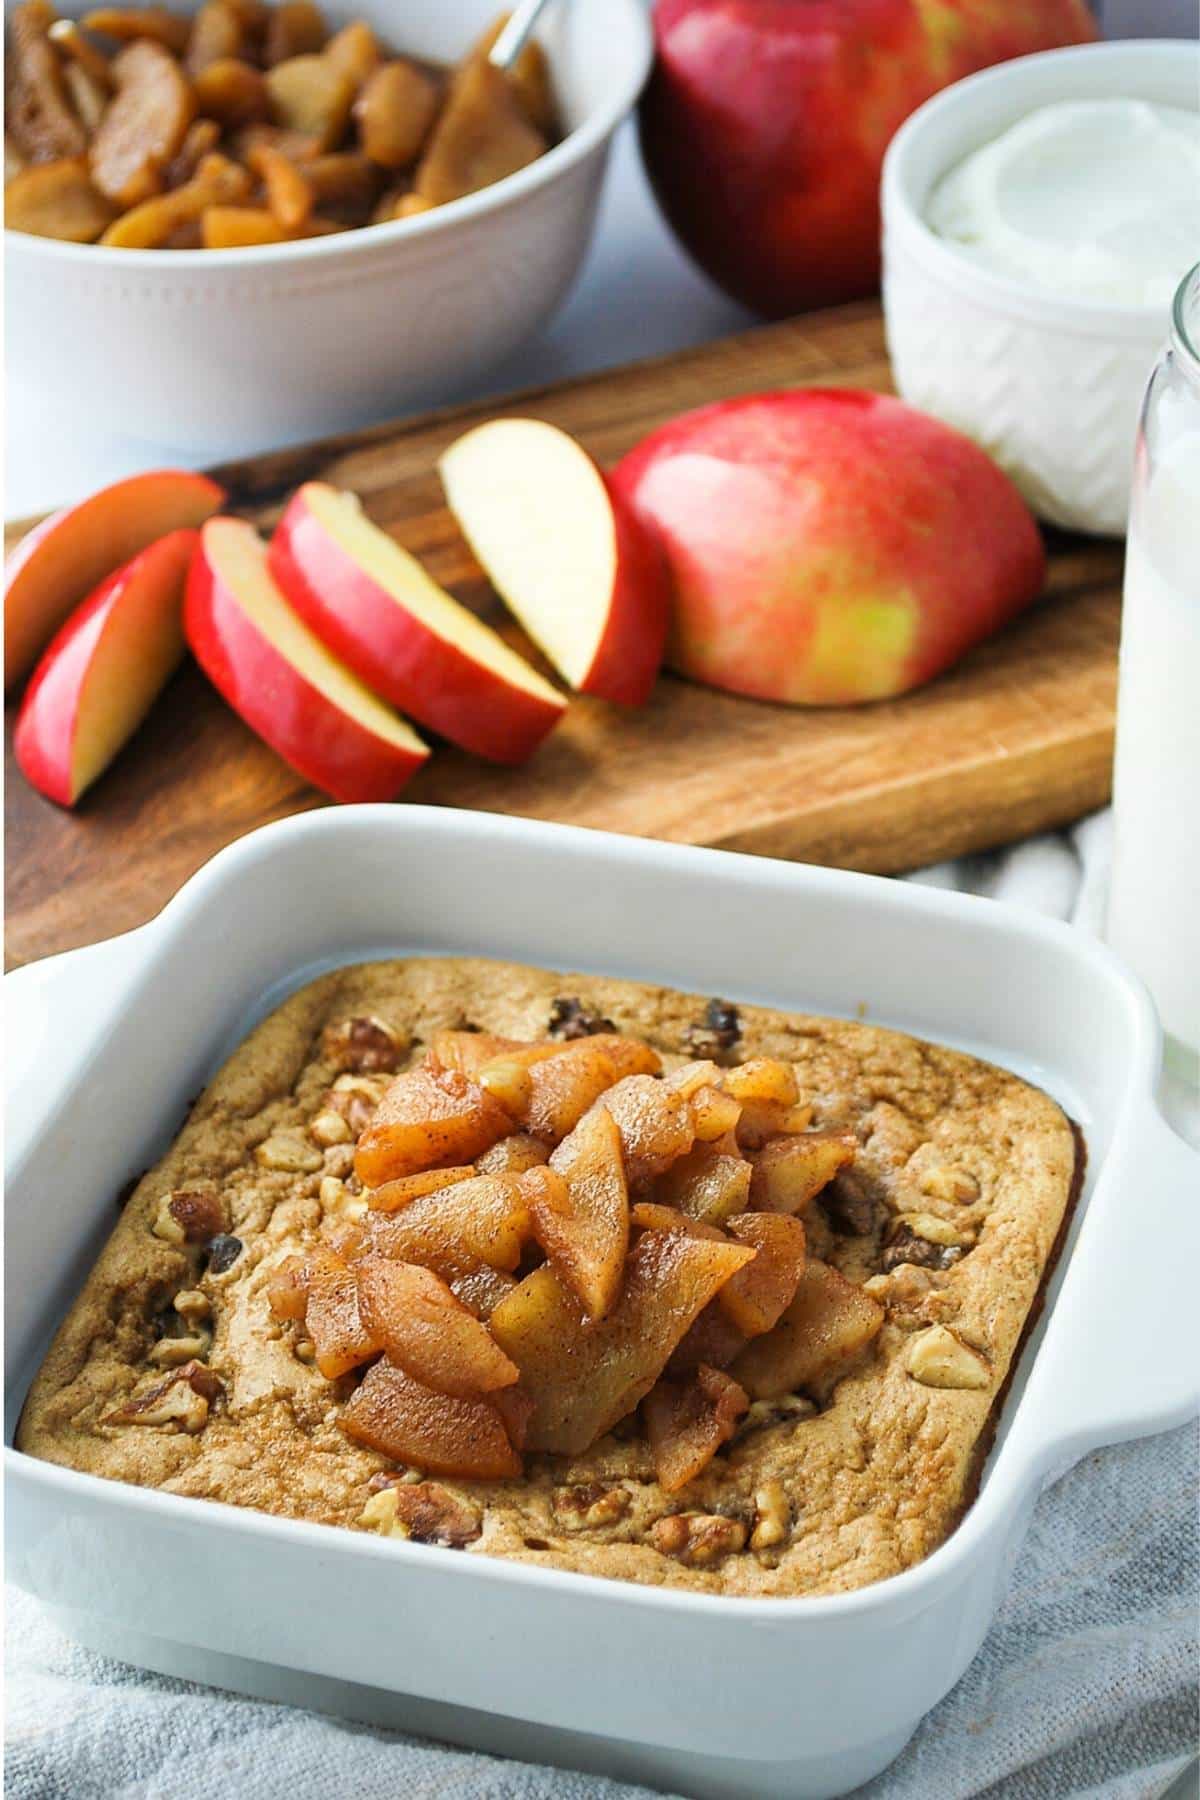 a pan of apple pie baked oats with cinnamon apples, a glass of milk, and sliced apples on a cutting board